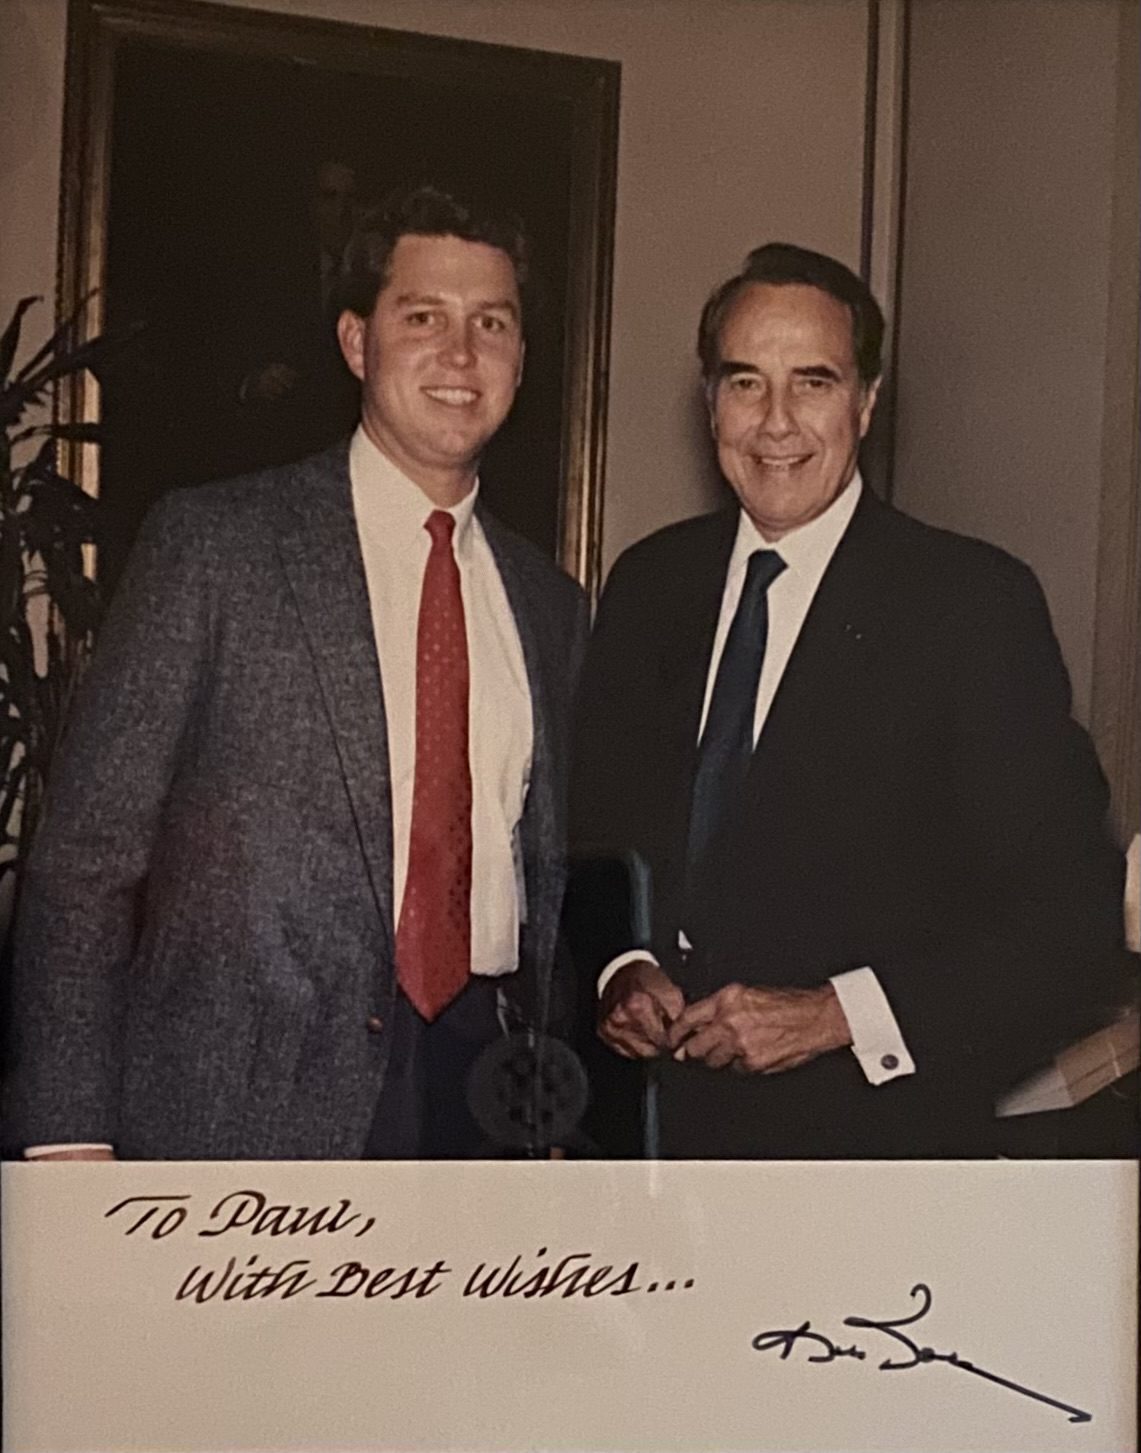 A young Paul Carter with former Senator Bob Dole, who worked closely with Nixon.